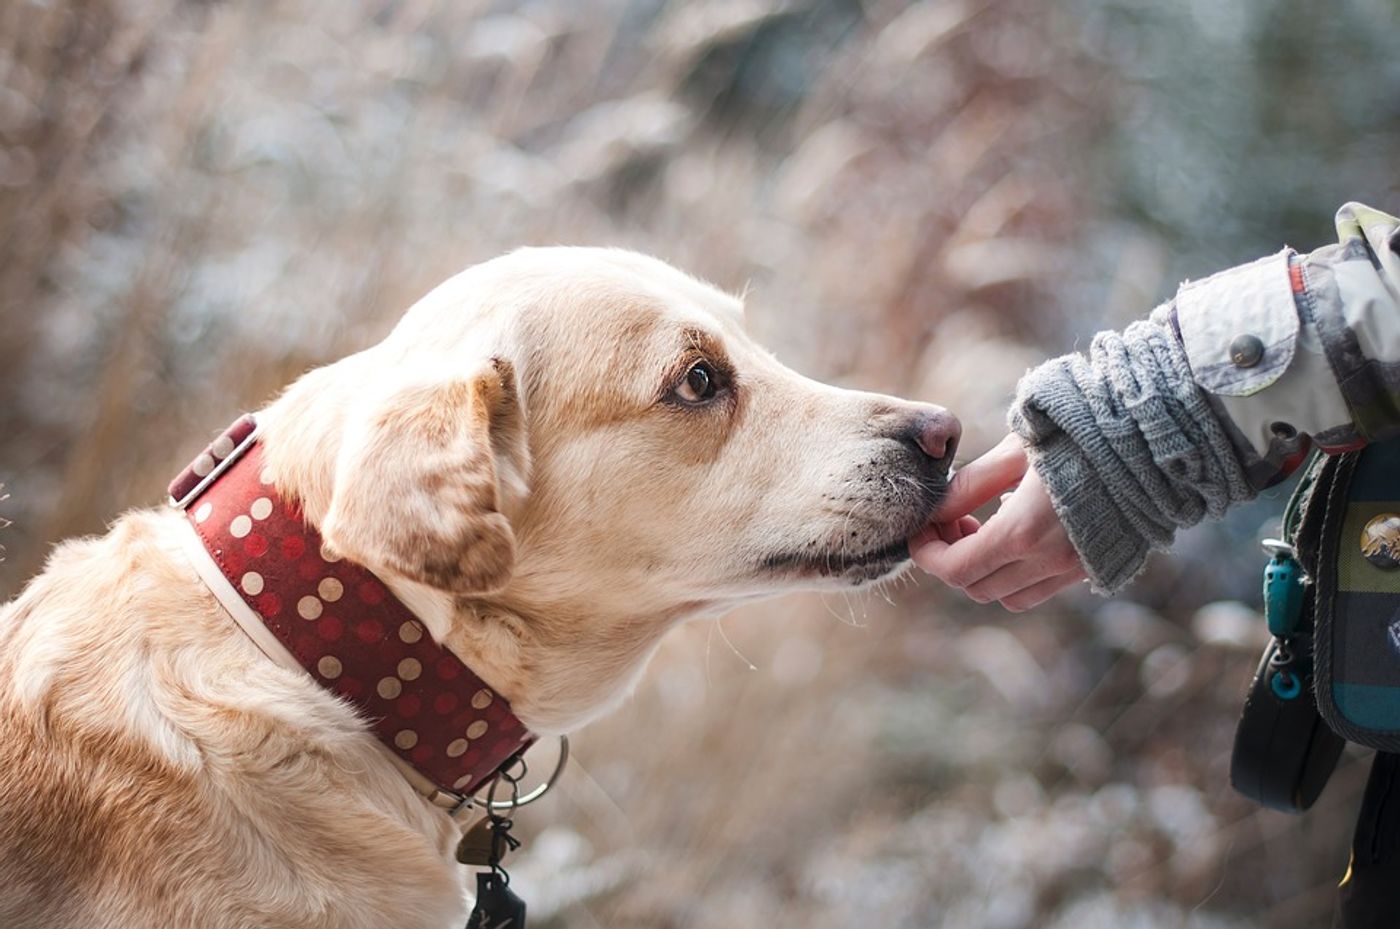 Can a human breast cancer drug save our furry friends? Photo: Pixabay